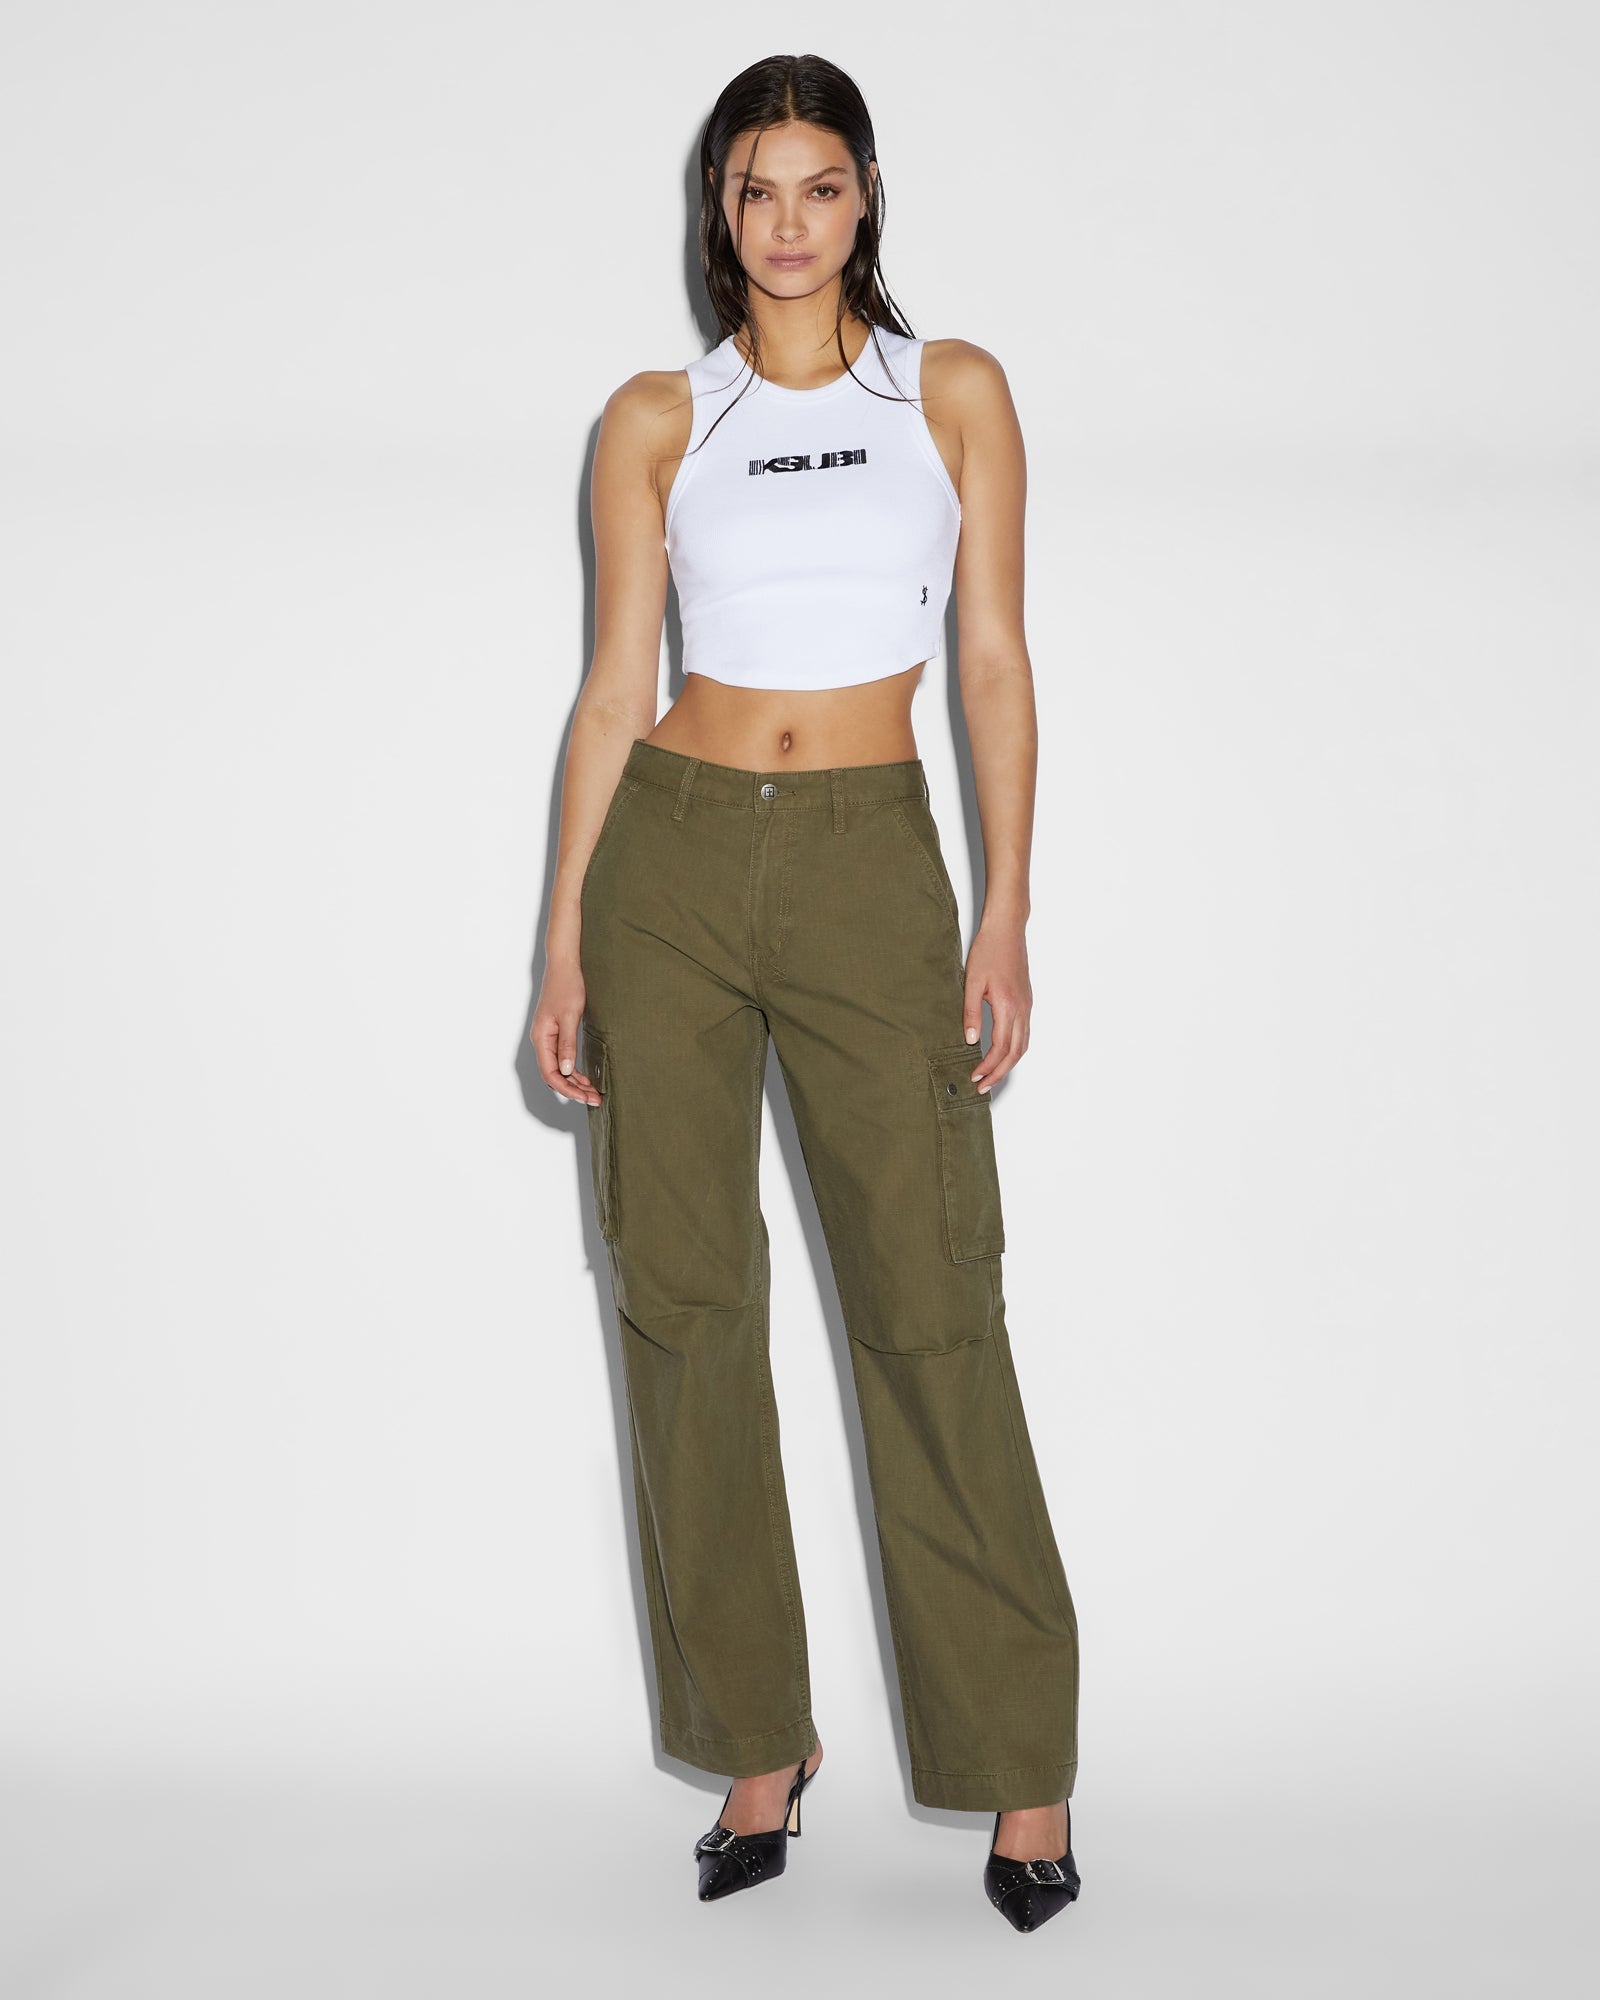 Women's Pants - Leather Pants, Trousers & More